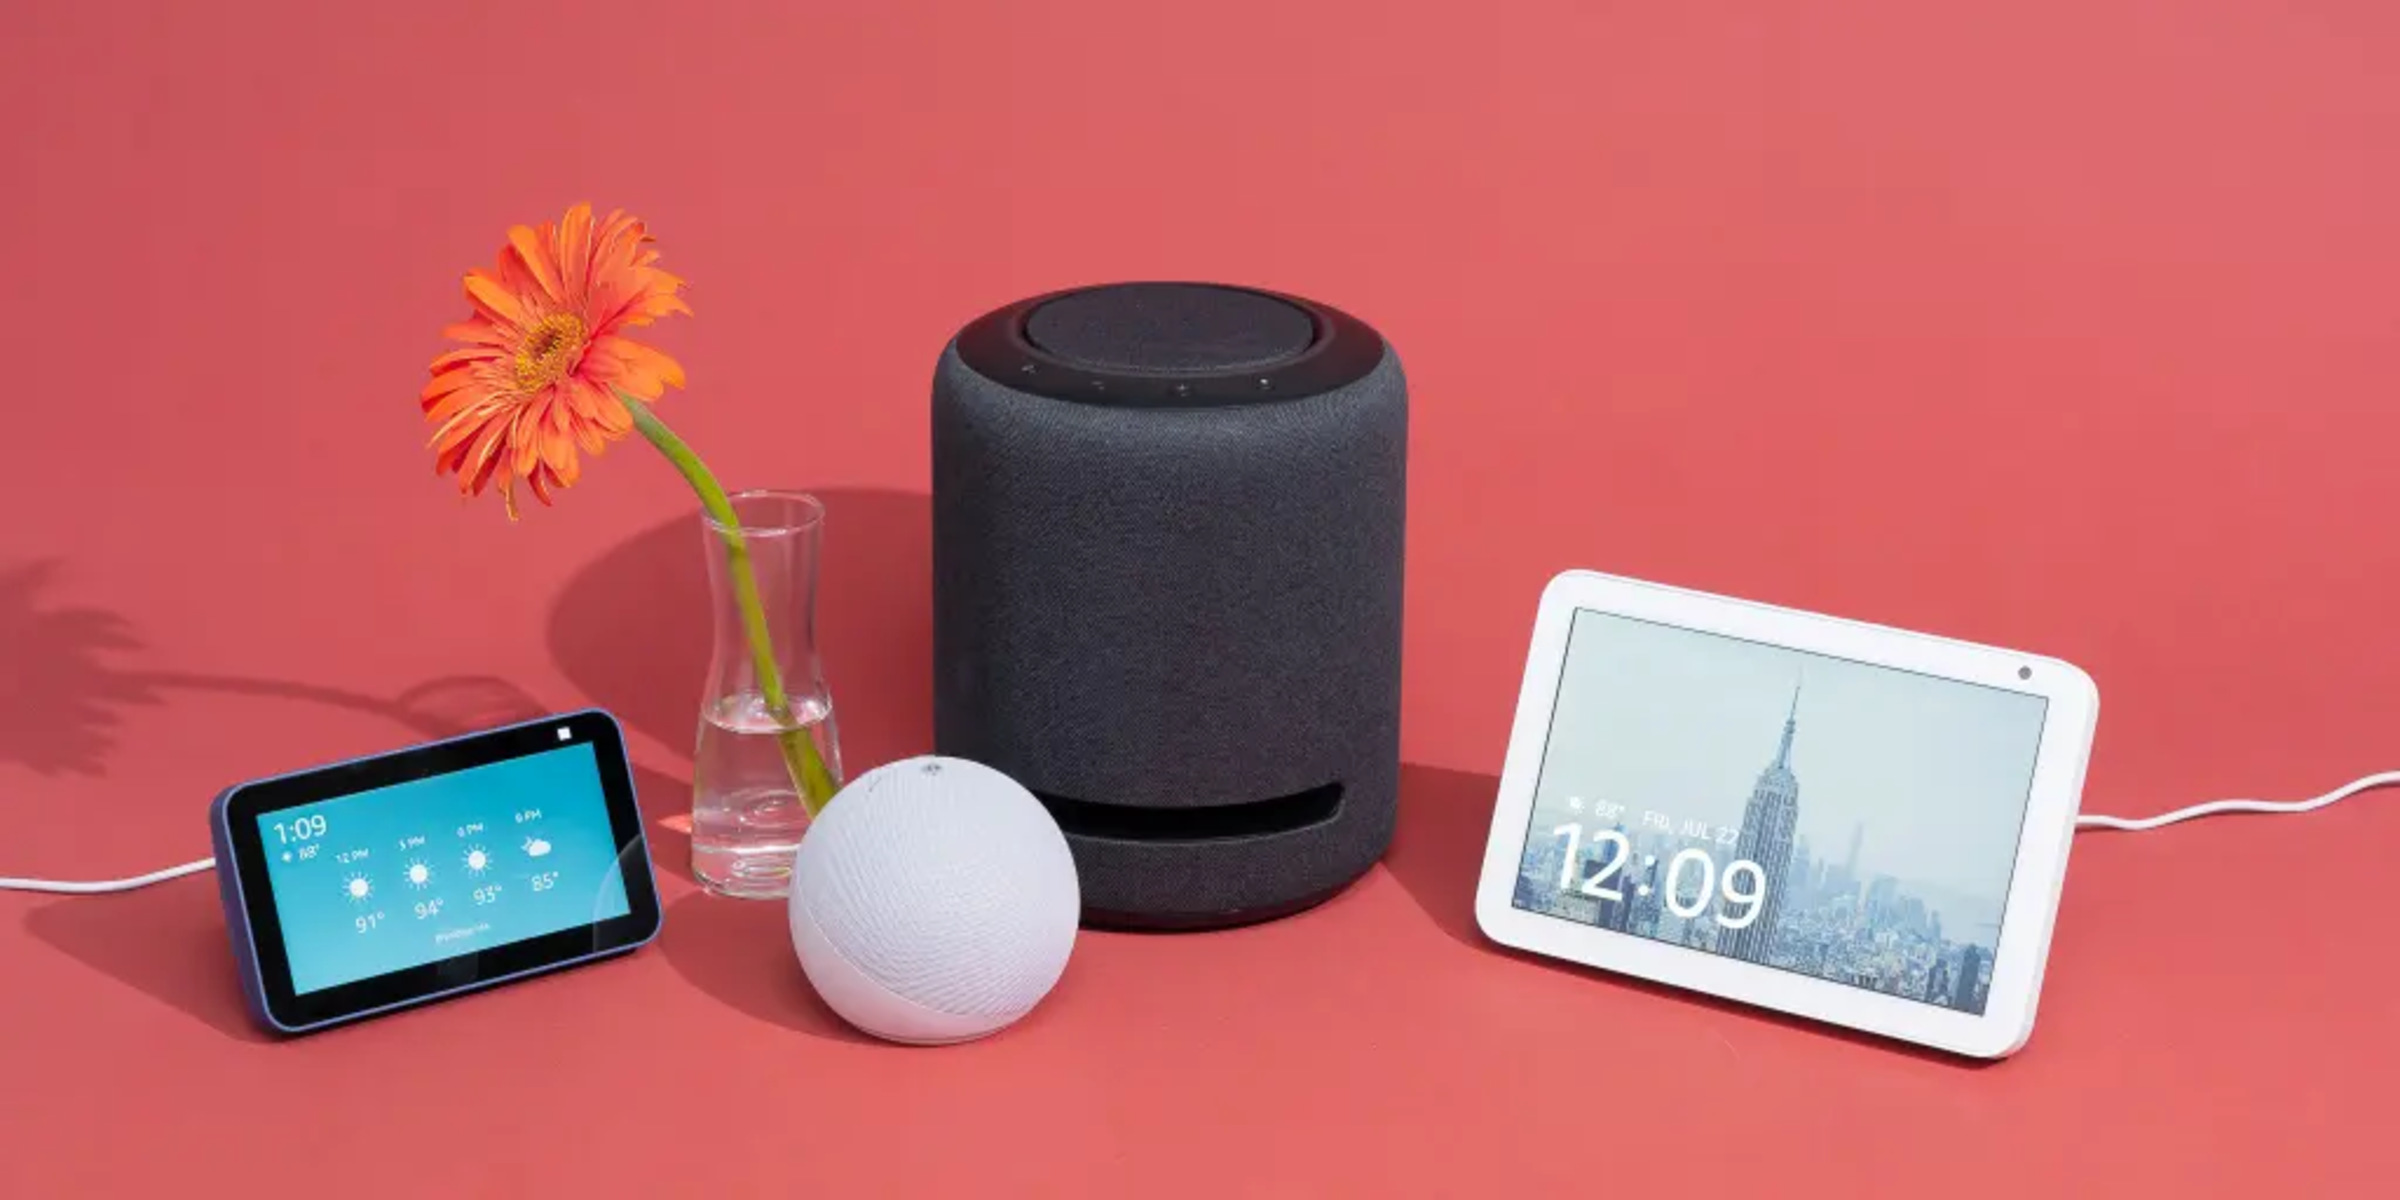 What Other Technologies Can Be Integrated With Smart Speaker Technology